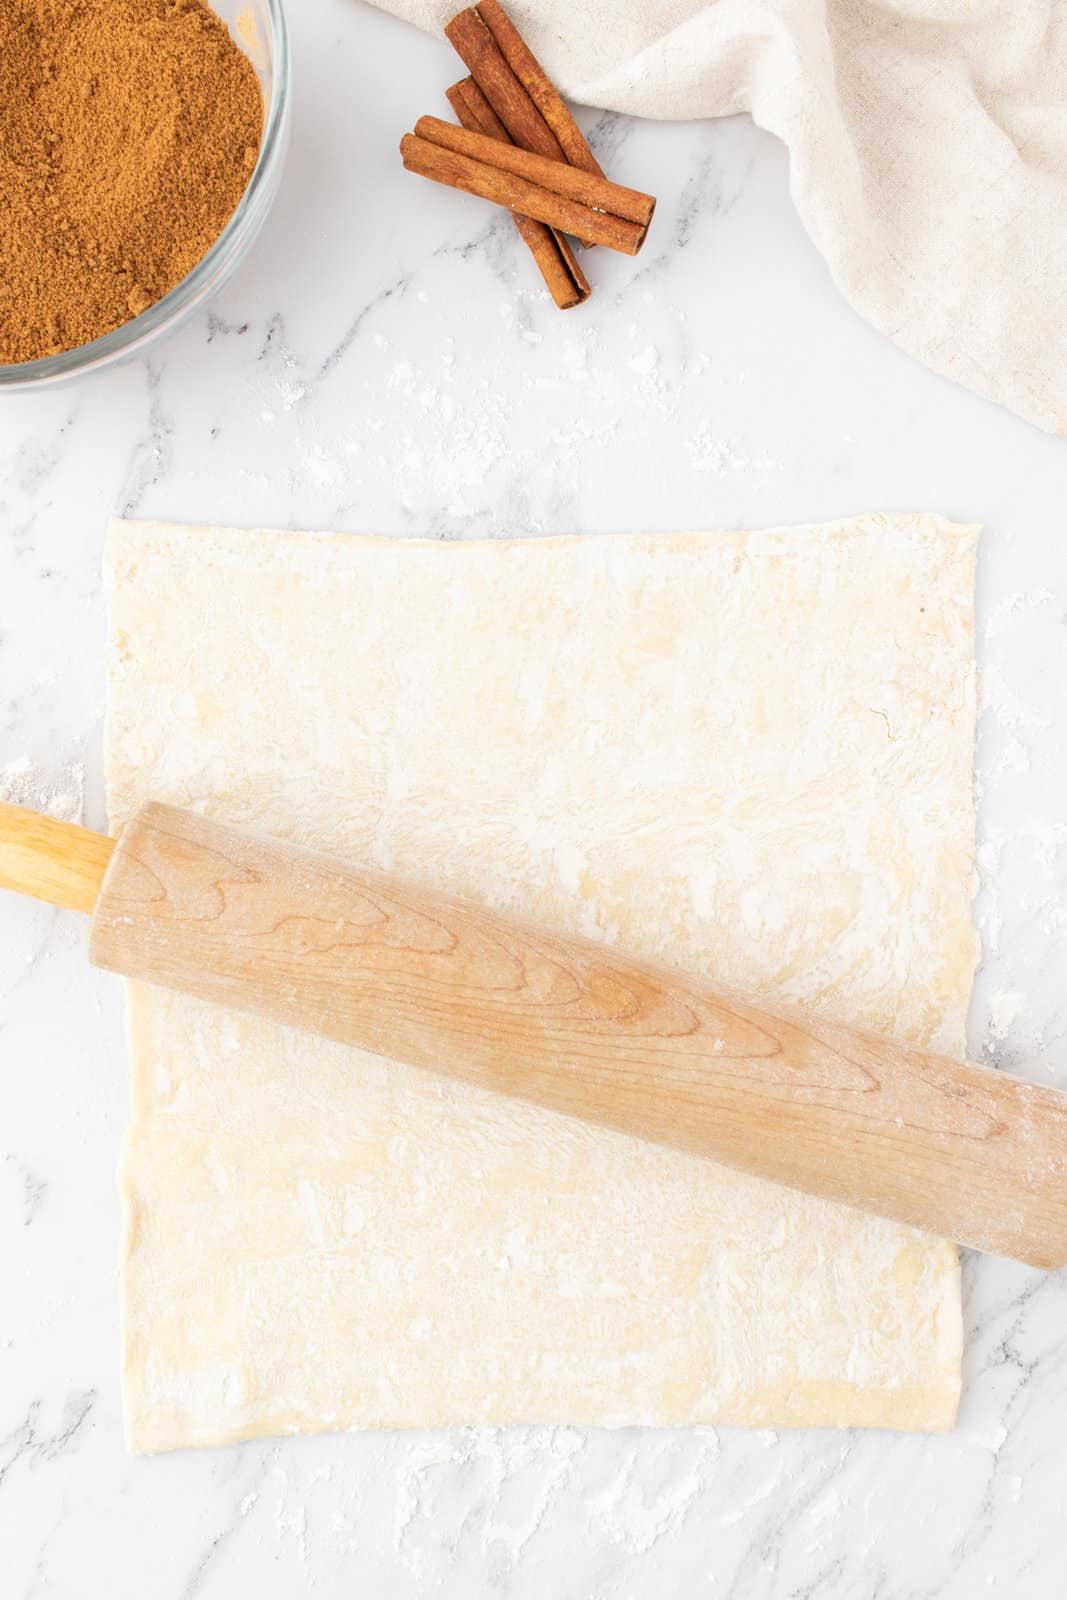 rolling out a sheet of puff pastry with a rolling pin.